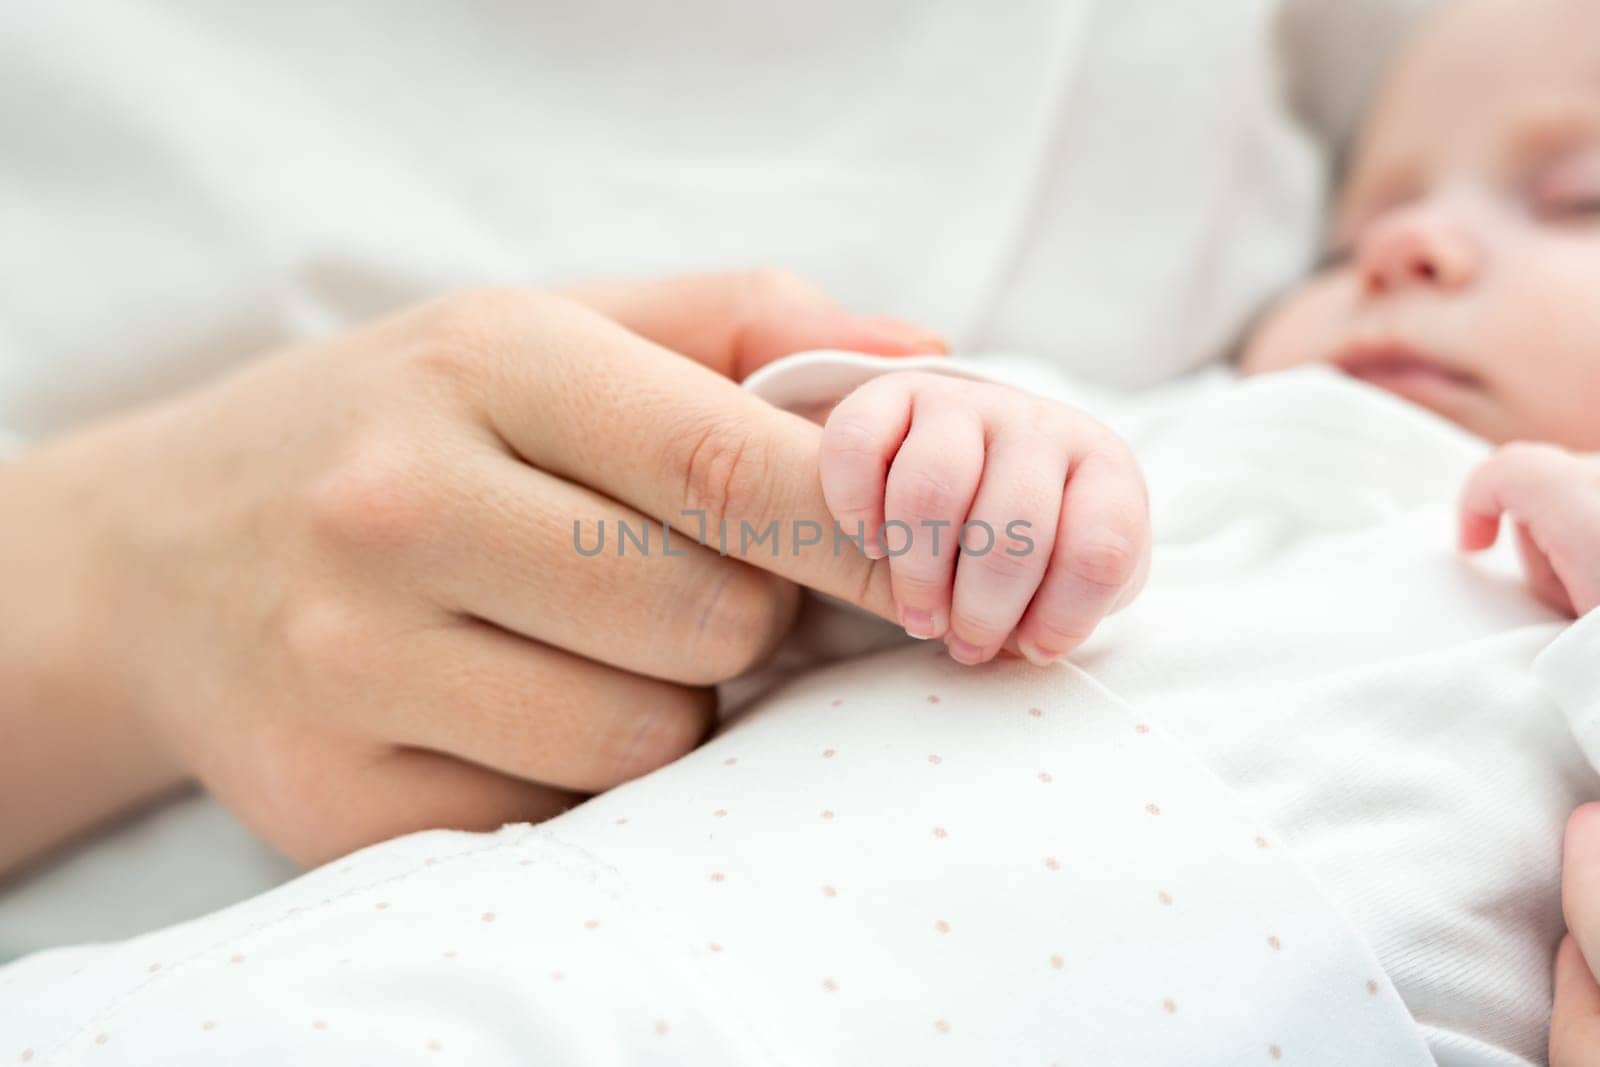 Tiny fingers cling to maternal assurance. Concept of the deep trust newborns instinctively feel by Mariakray